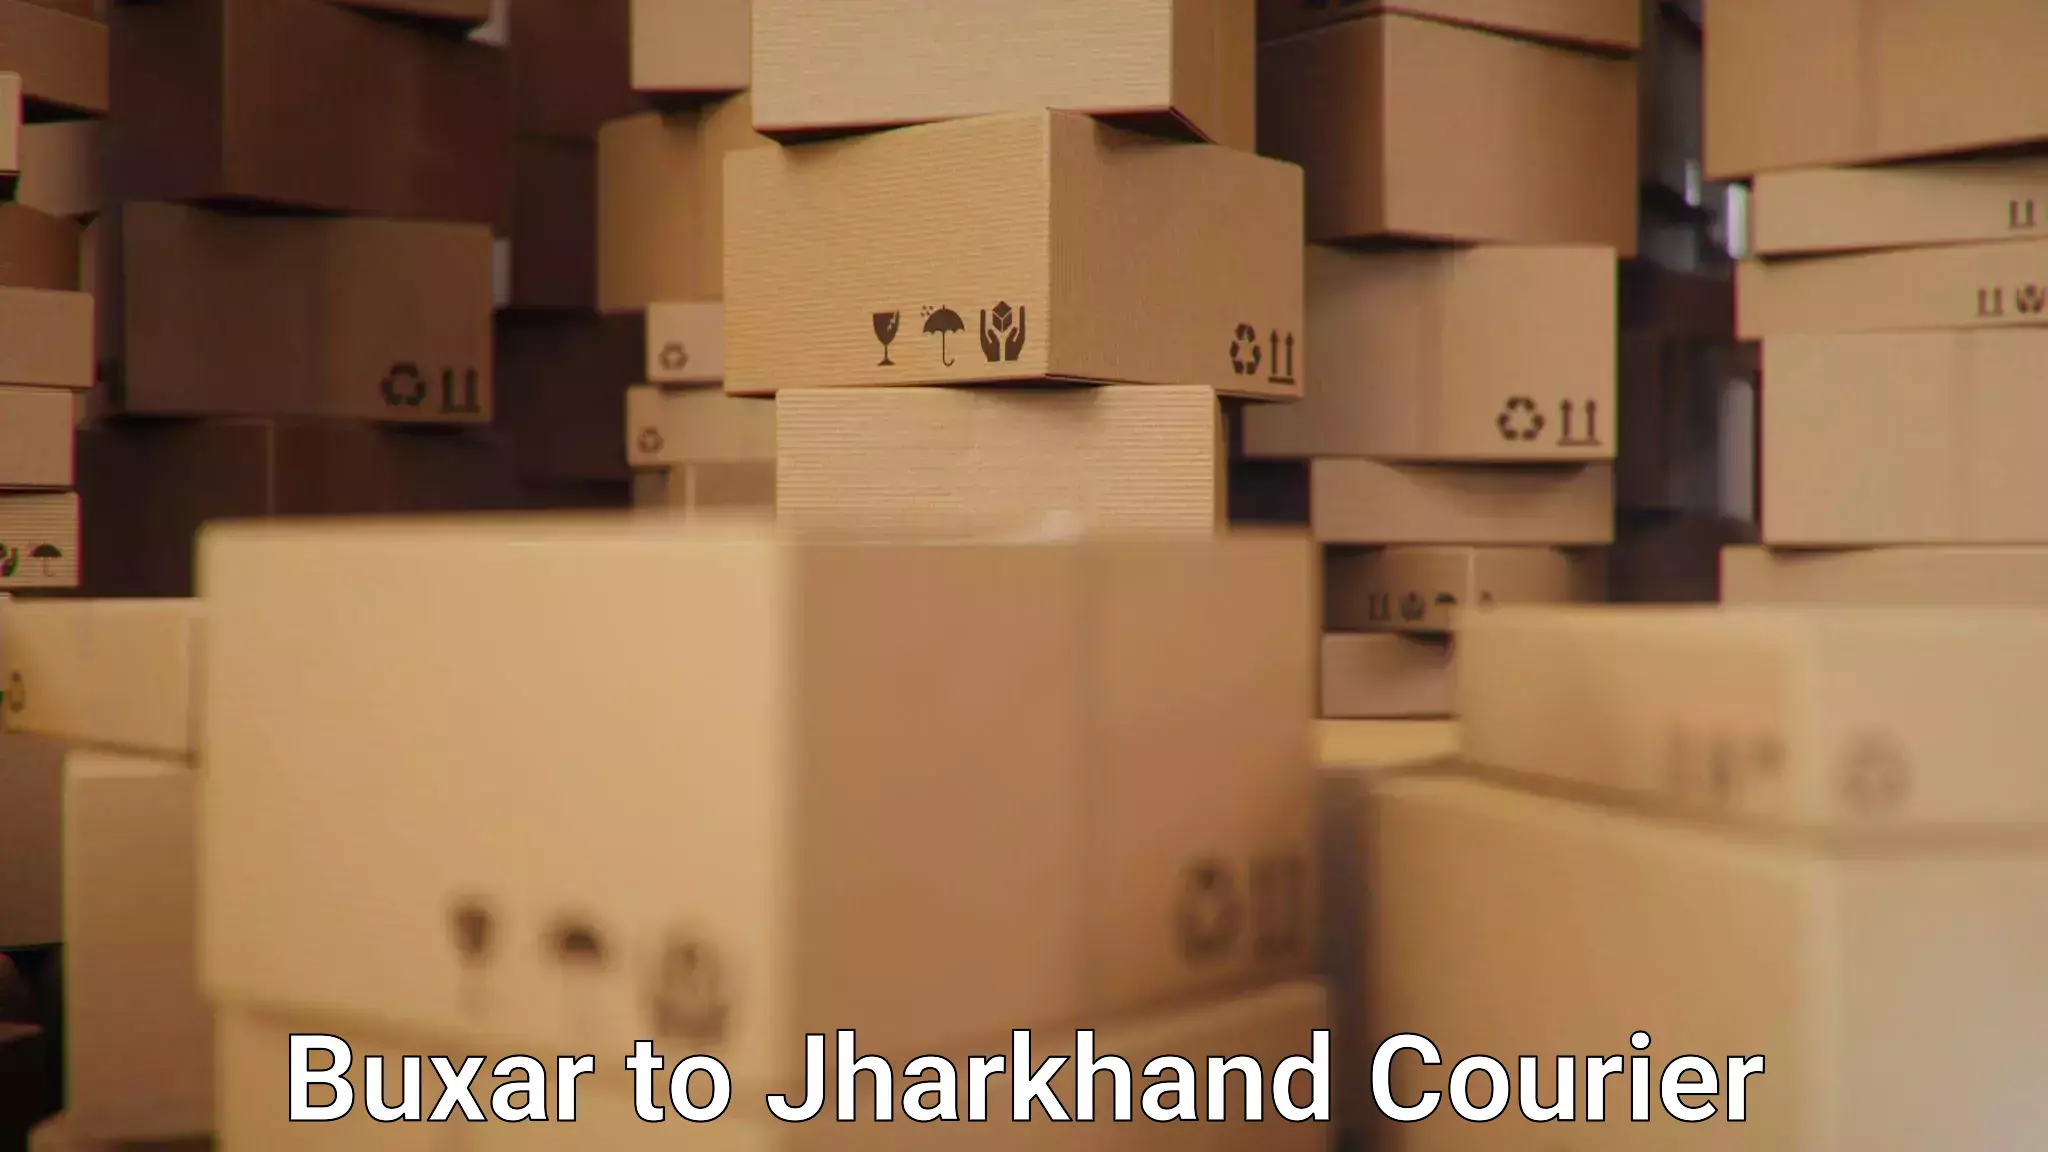 Express delivery capabilities Buxar to Jharkhand